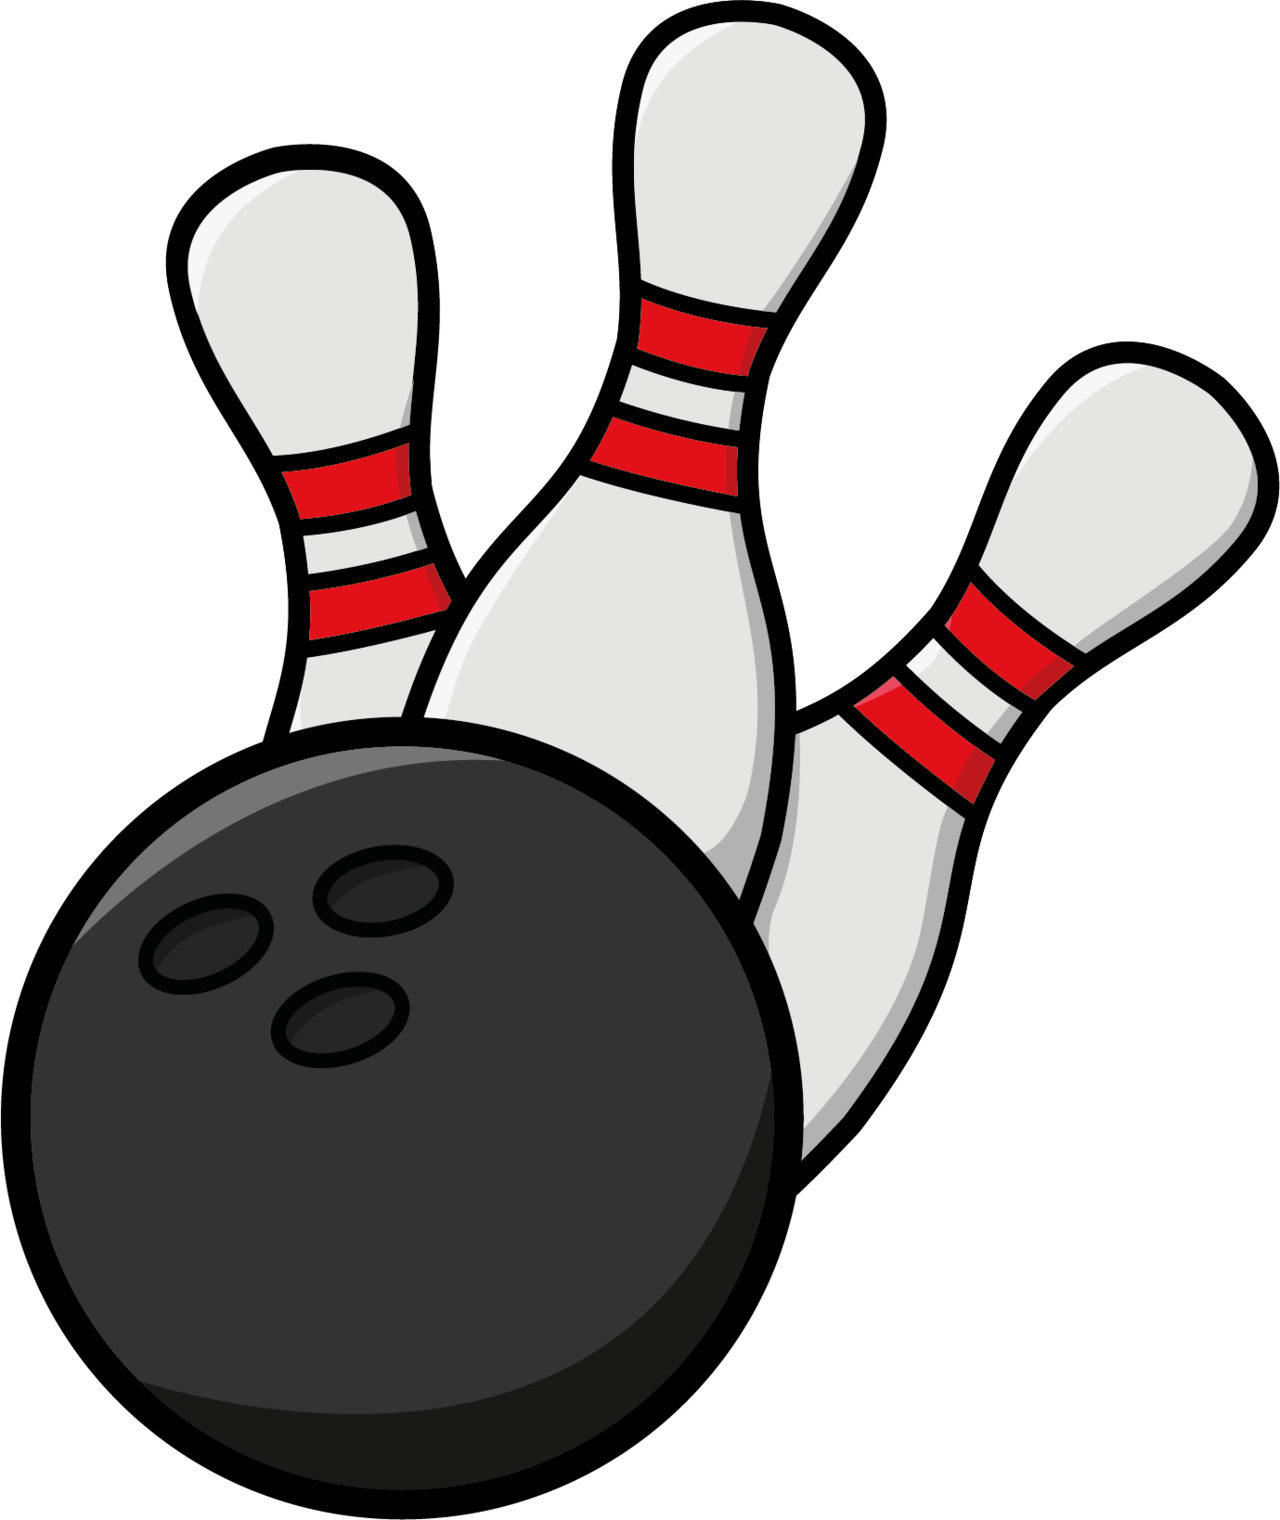 Bowling Cartoon Images - ClipArt Best